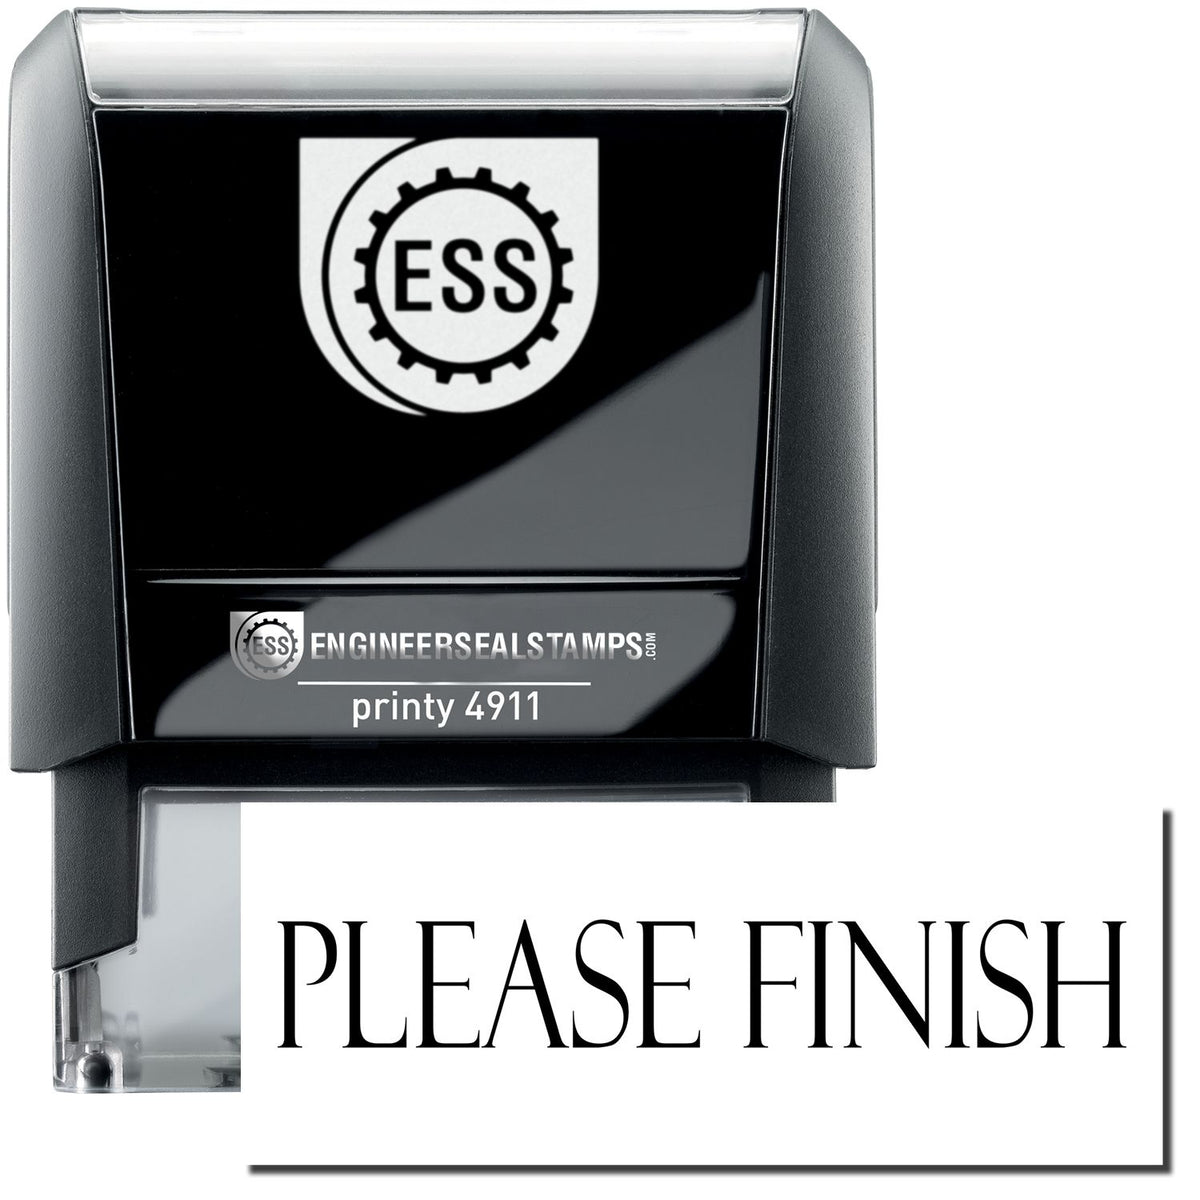 A self-inking stamp with a stamped image showing how the text &quot;PLEASE FINISH&quot; is displayed after stamping.